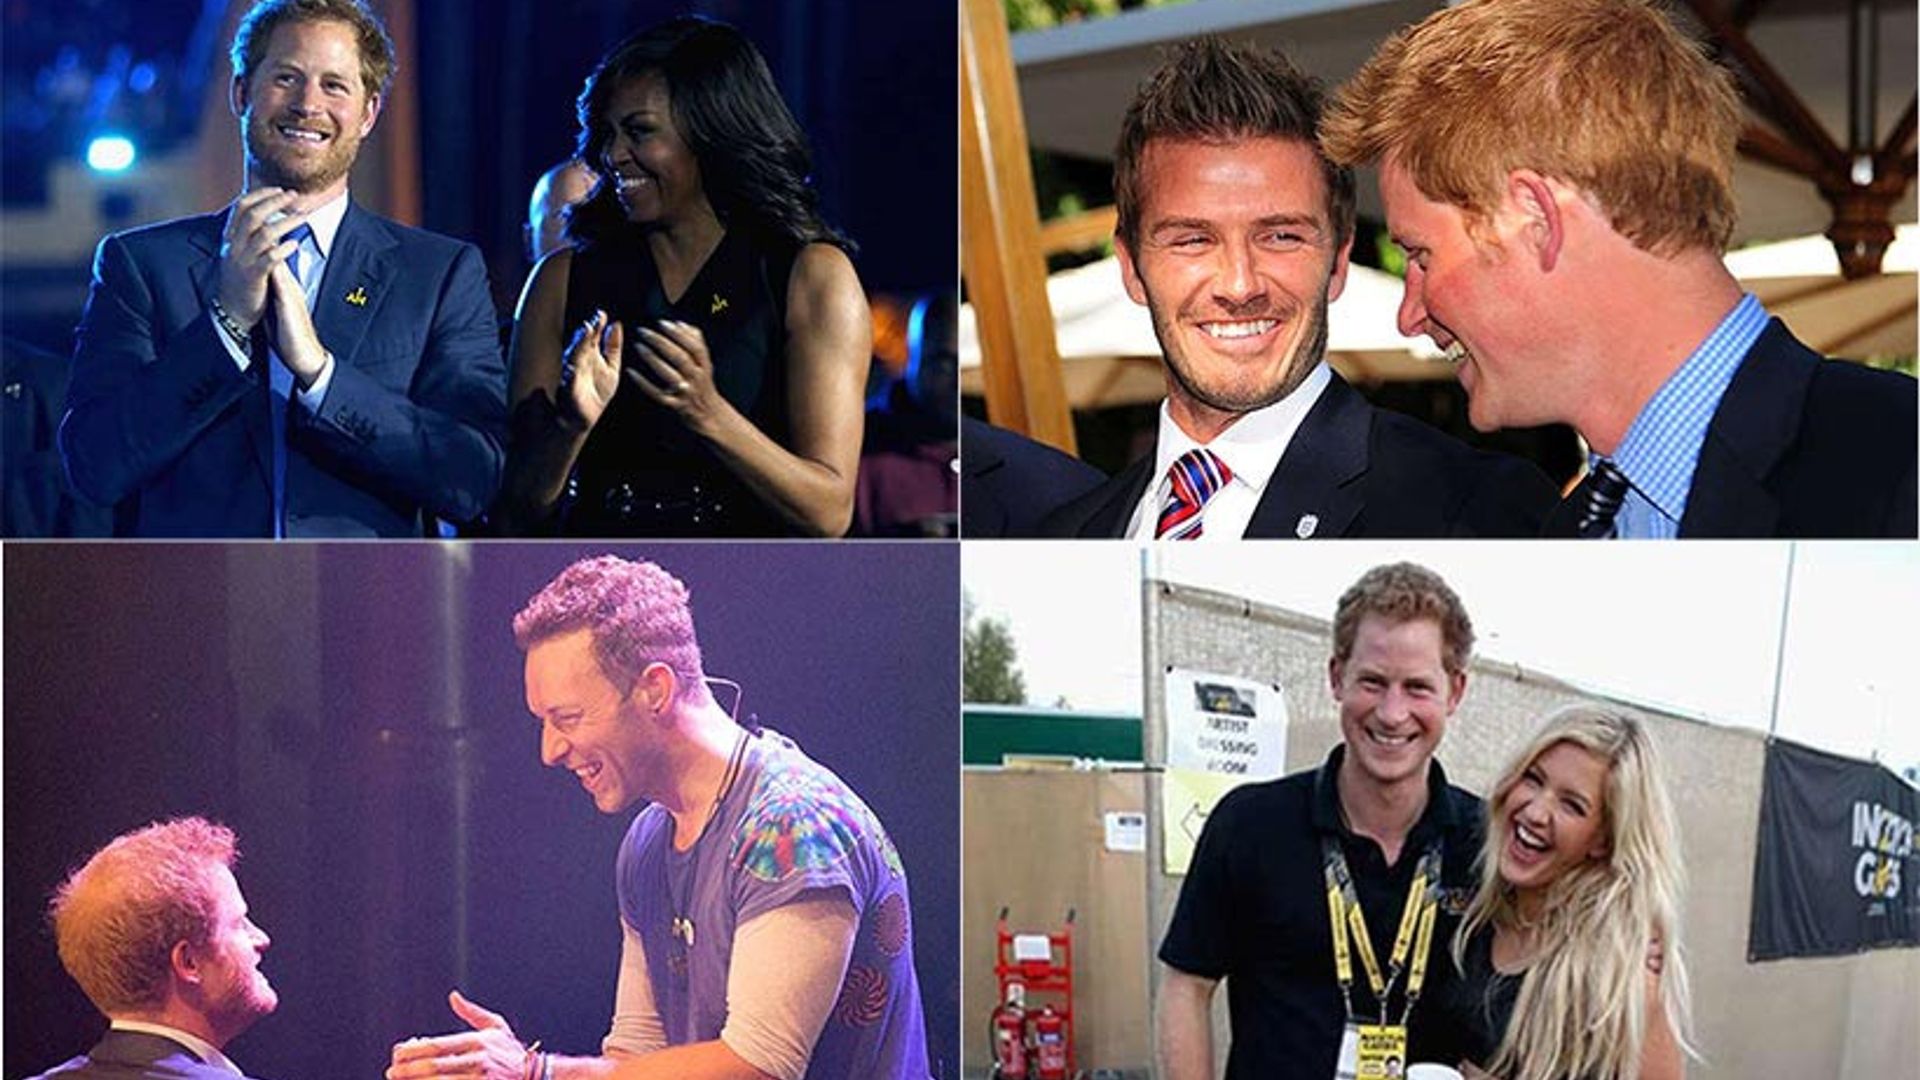 Prince Harry and his famous friends